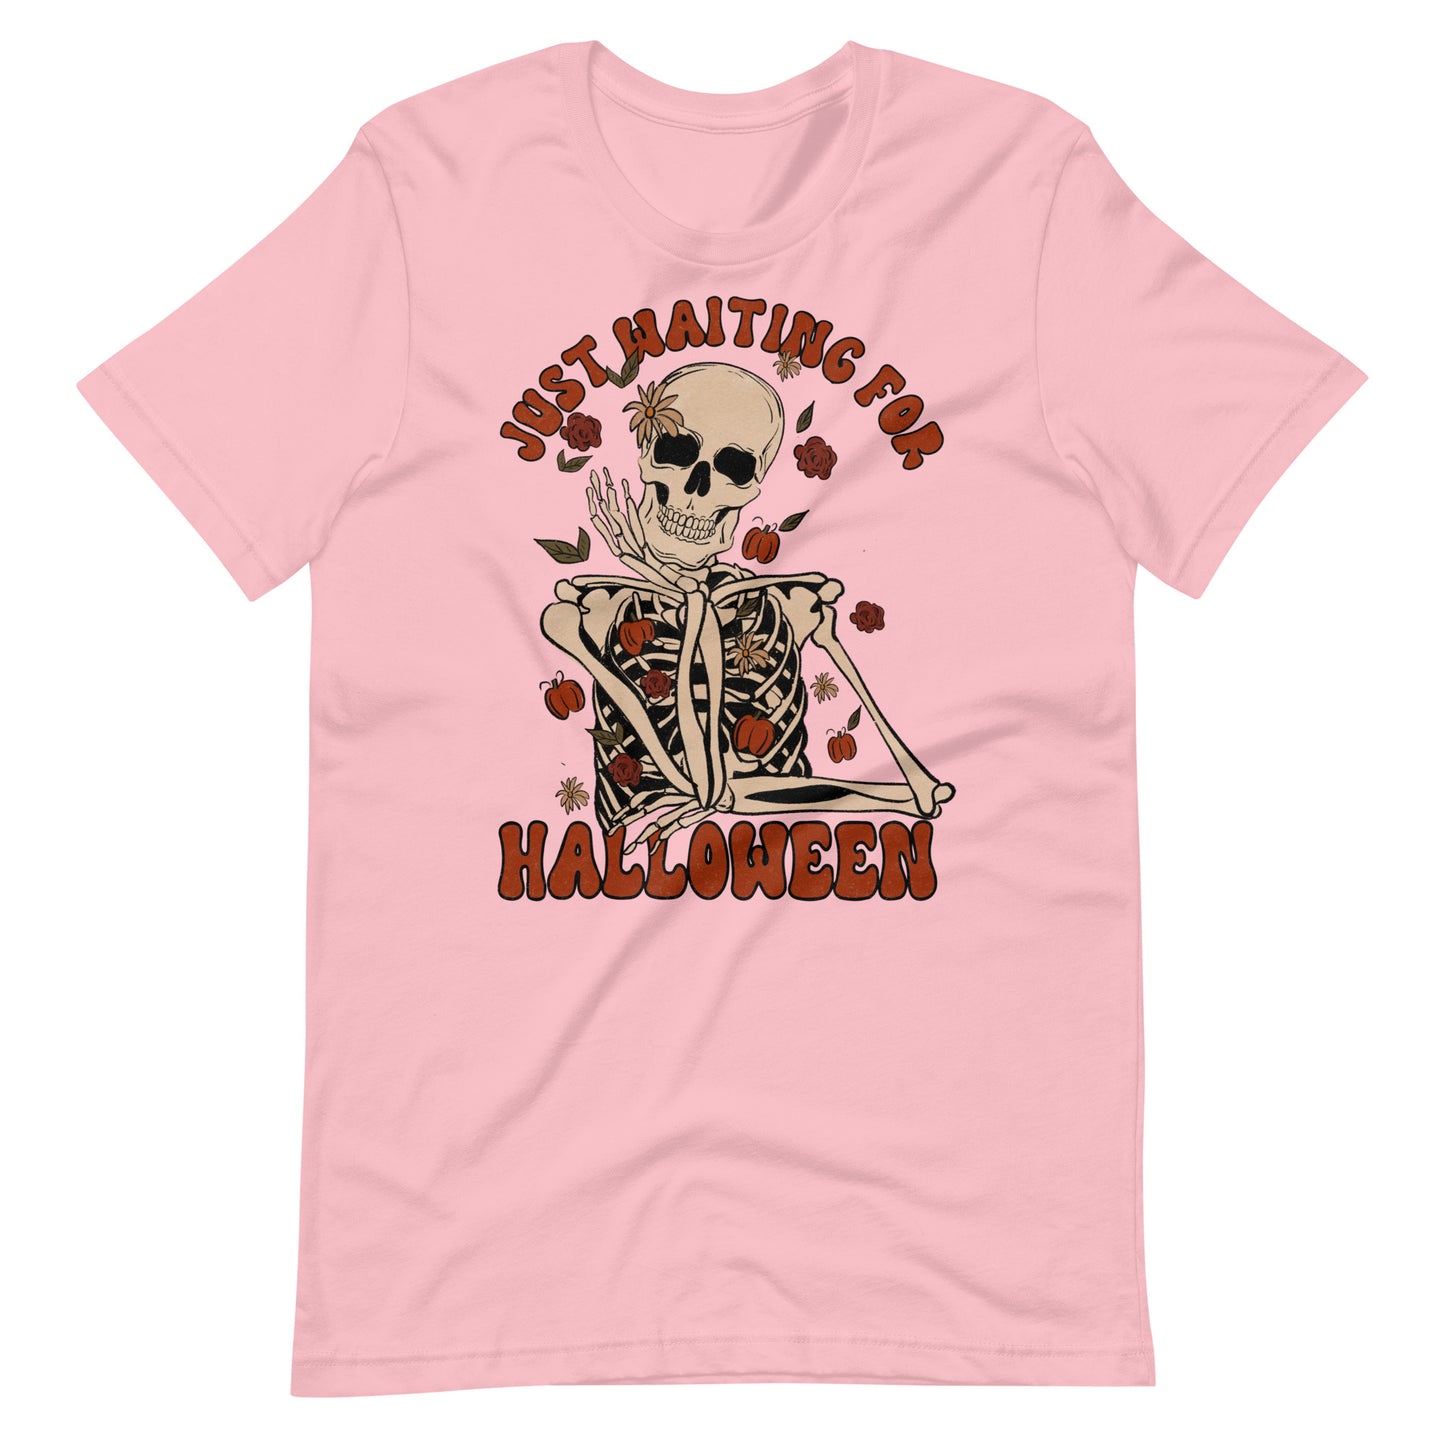 Just Waiting For Halloween Skeleton Spooky Tee Unisex t-shirt